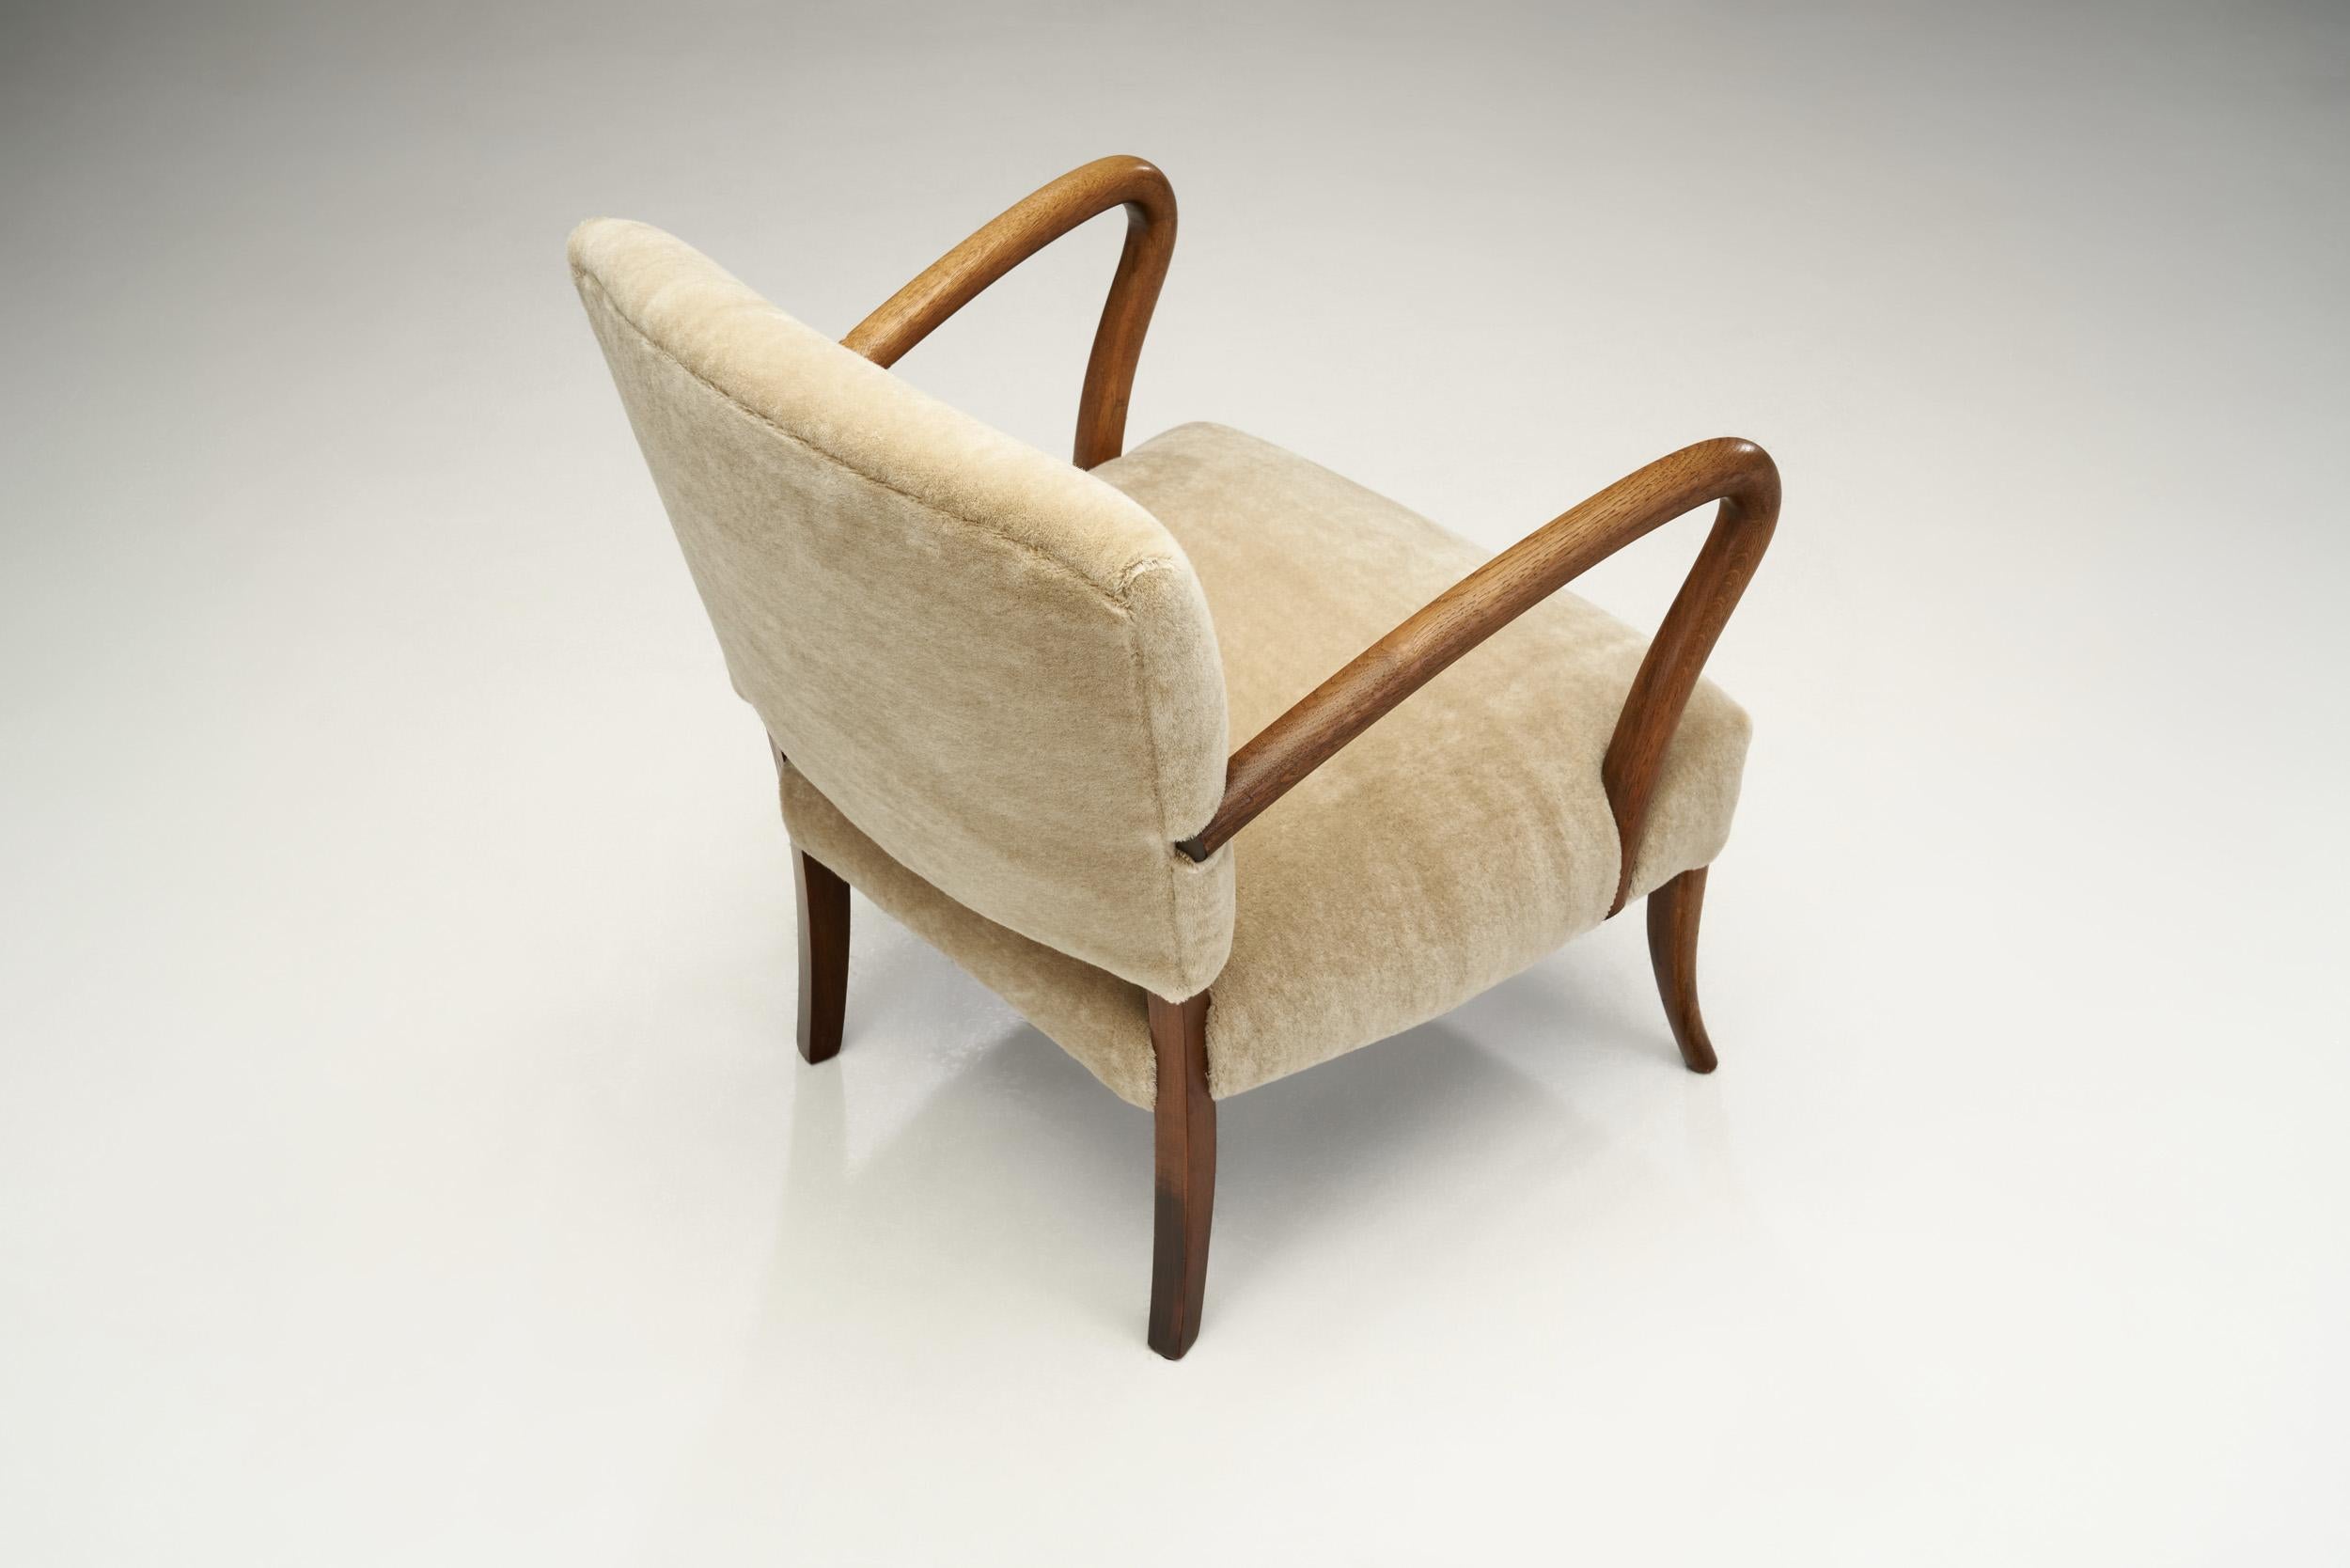 Mid-20th Century Sculptural Armchair with Curved Arms, Europe ca 1950s For Sale